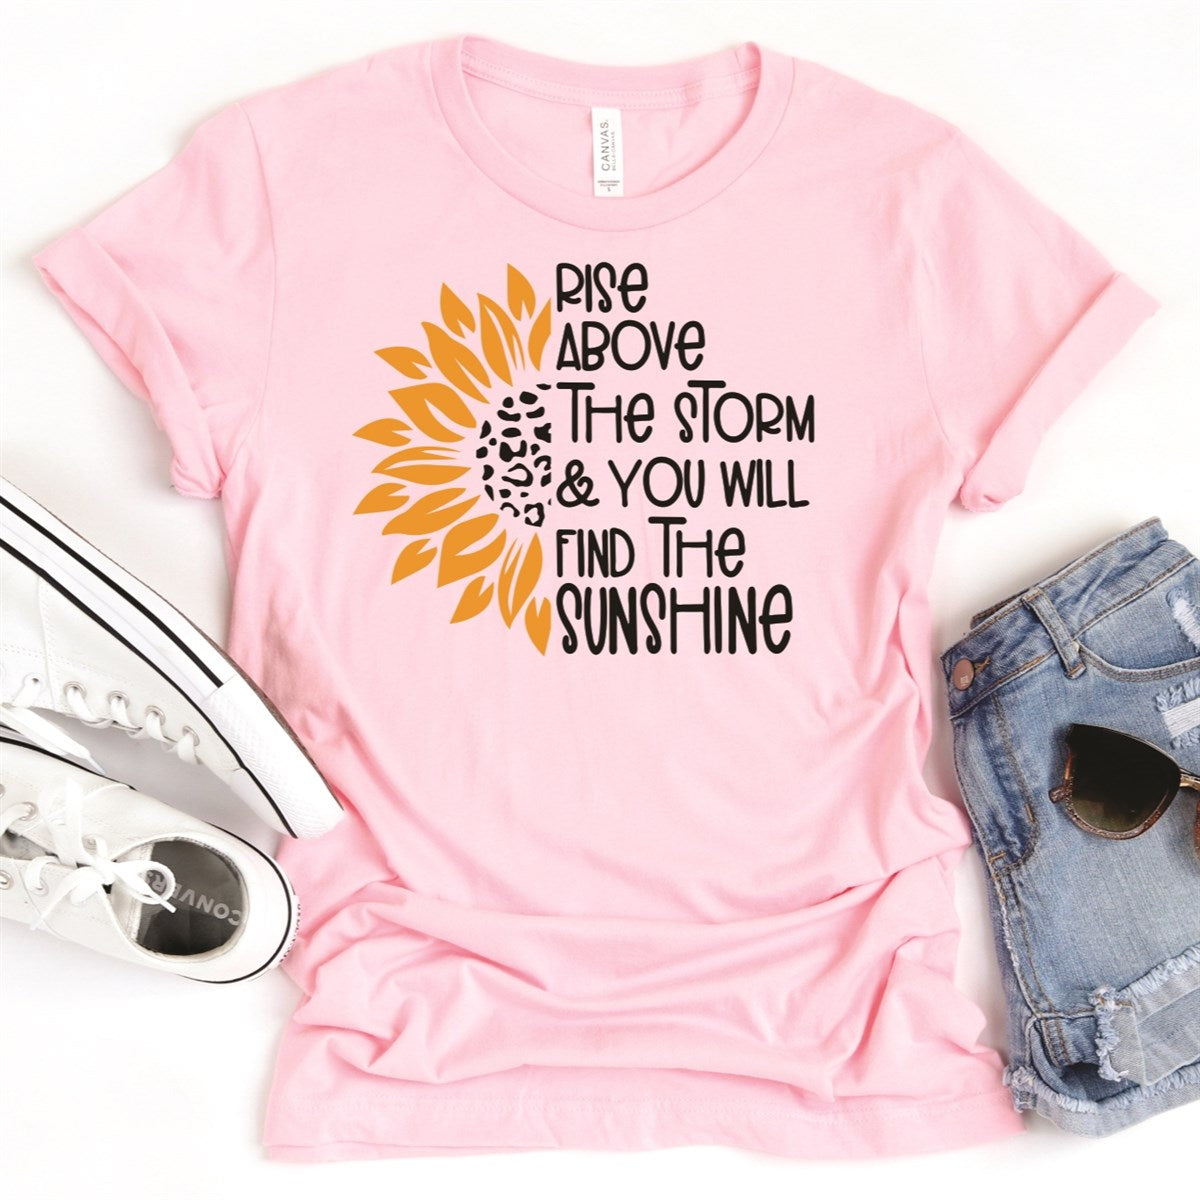 Rise Above The Storm & You Will See The Sunshine Tee